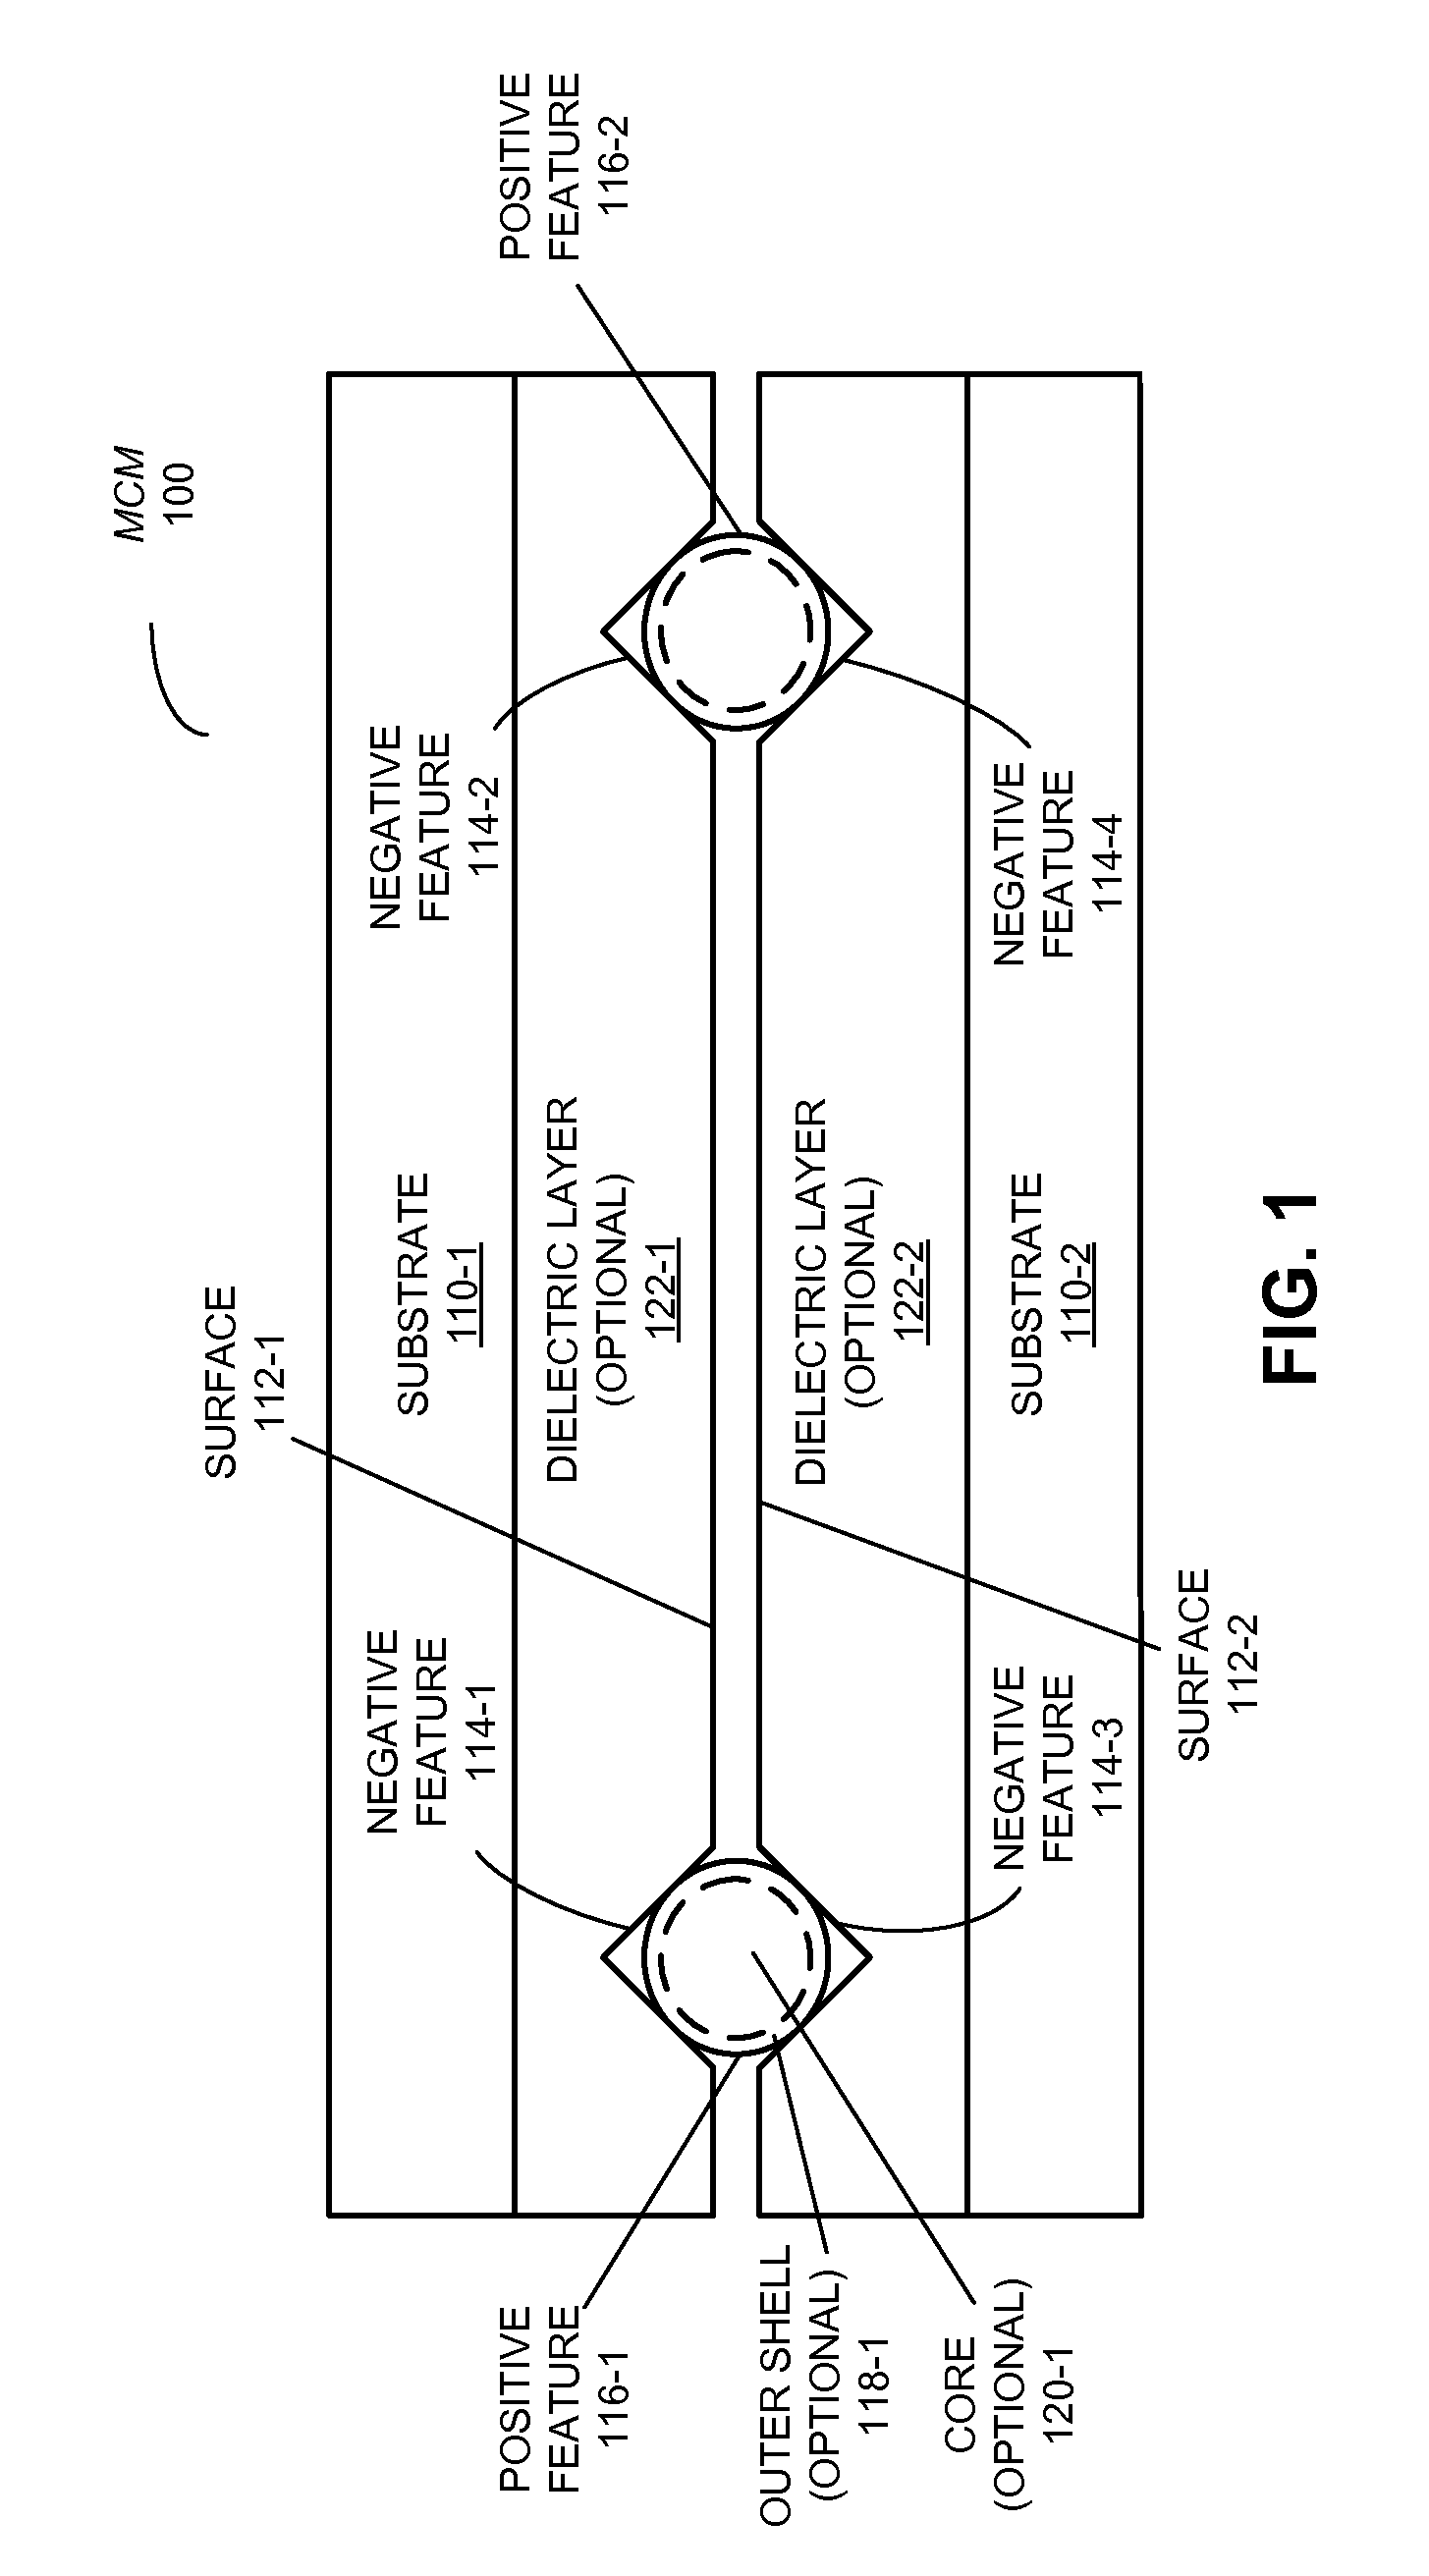 Assembly of multi-chip modules using sacrificial features